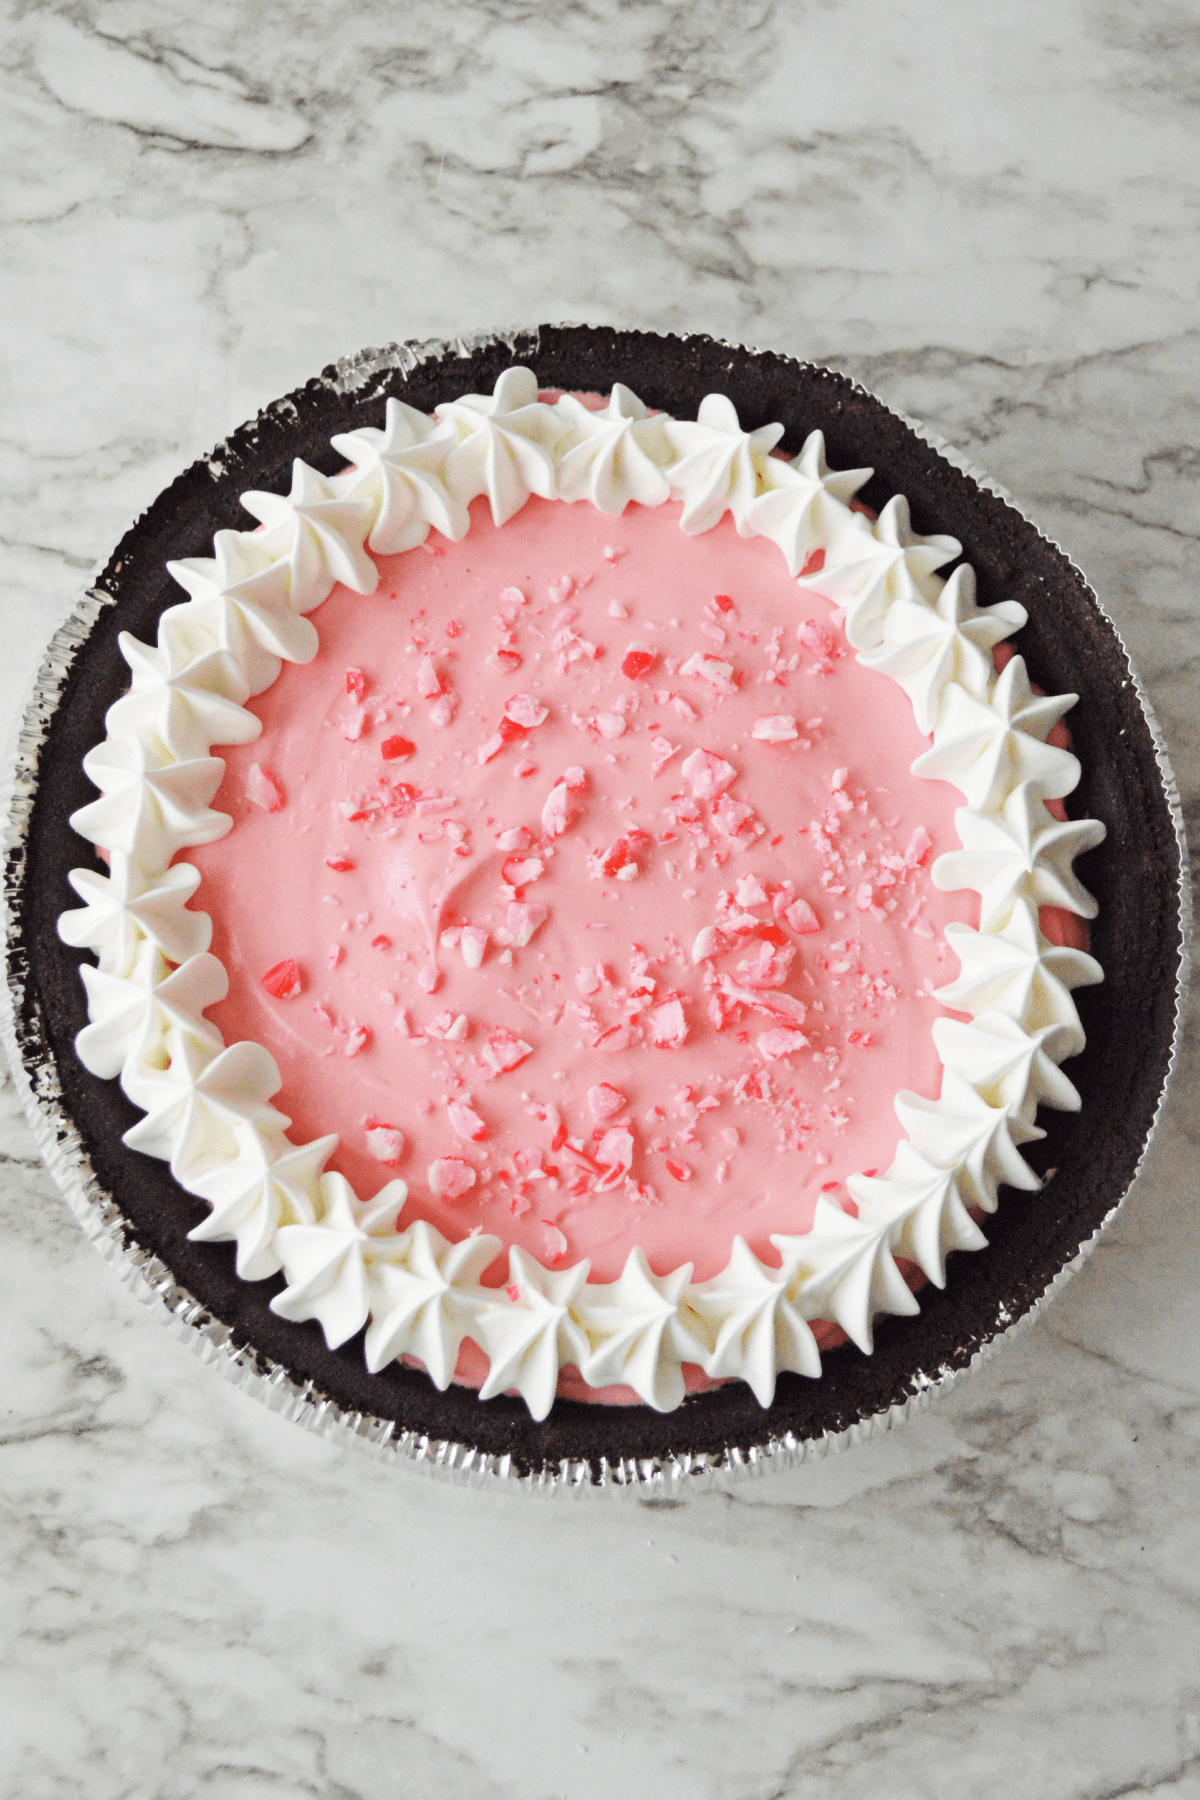 Whipped cream on no bake peppermint pie